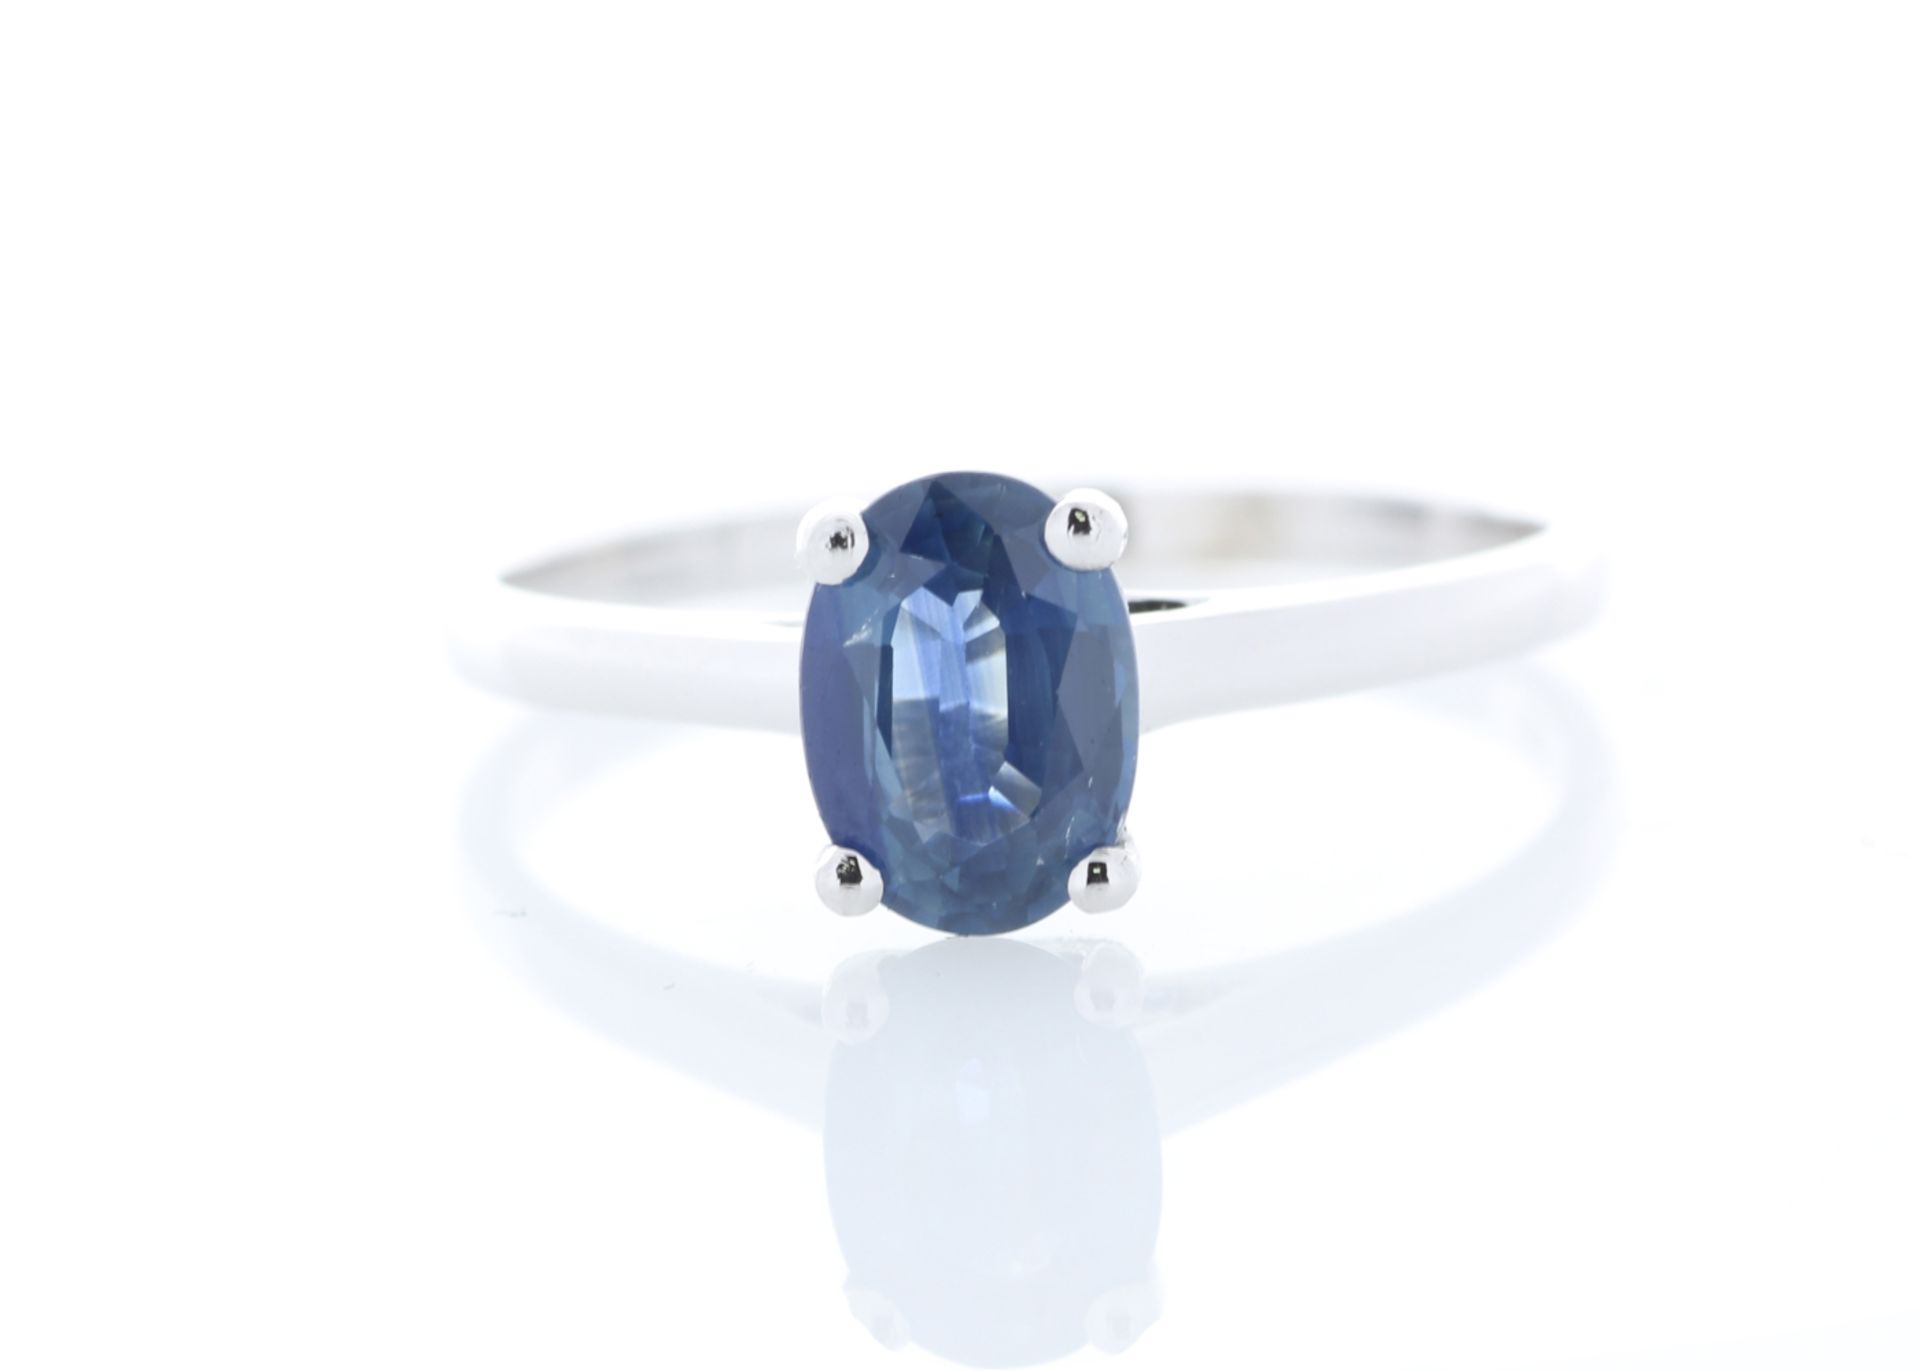 9ct White Gold Single Stone Oval Cut Sapphire Ring 1.08 Carats - Valued by AGI £865.00 - 9ct White